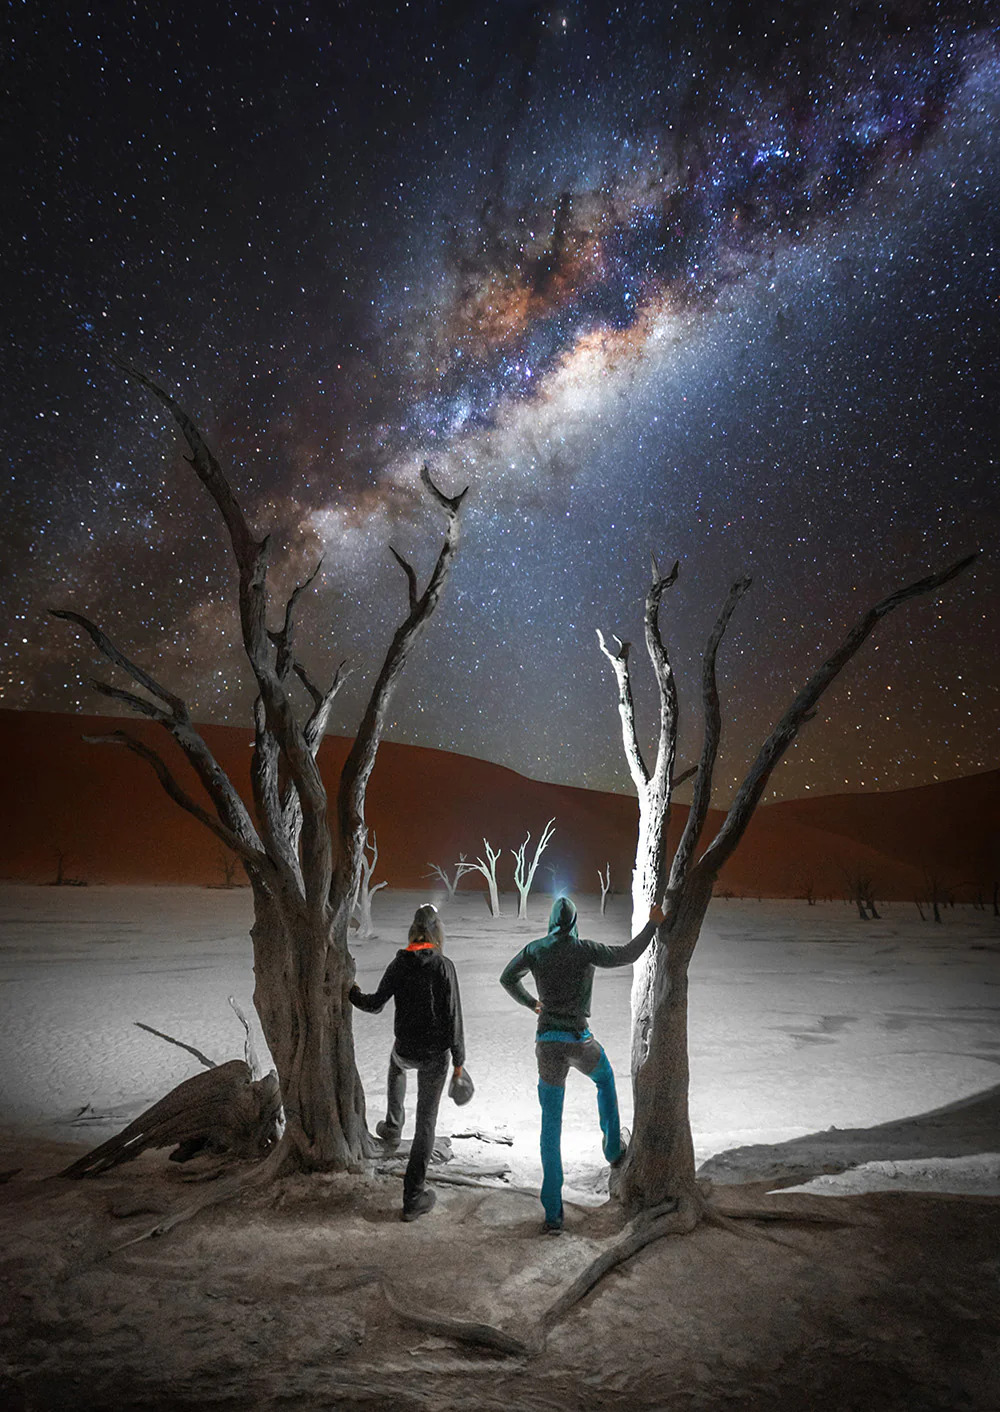 Self portrait of Steffi Liebermann and a friend under the night sky viewing the Milky Way | Titled: Friends | ©2020 Steffi Liebermann